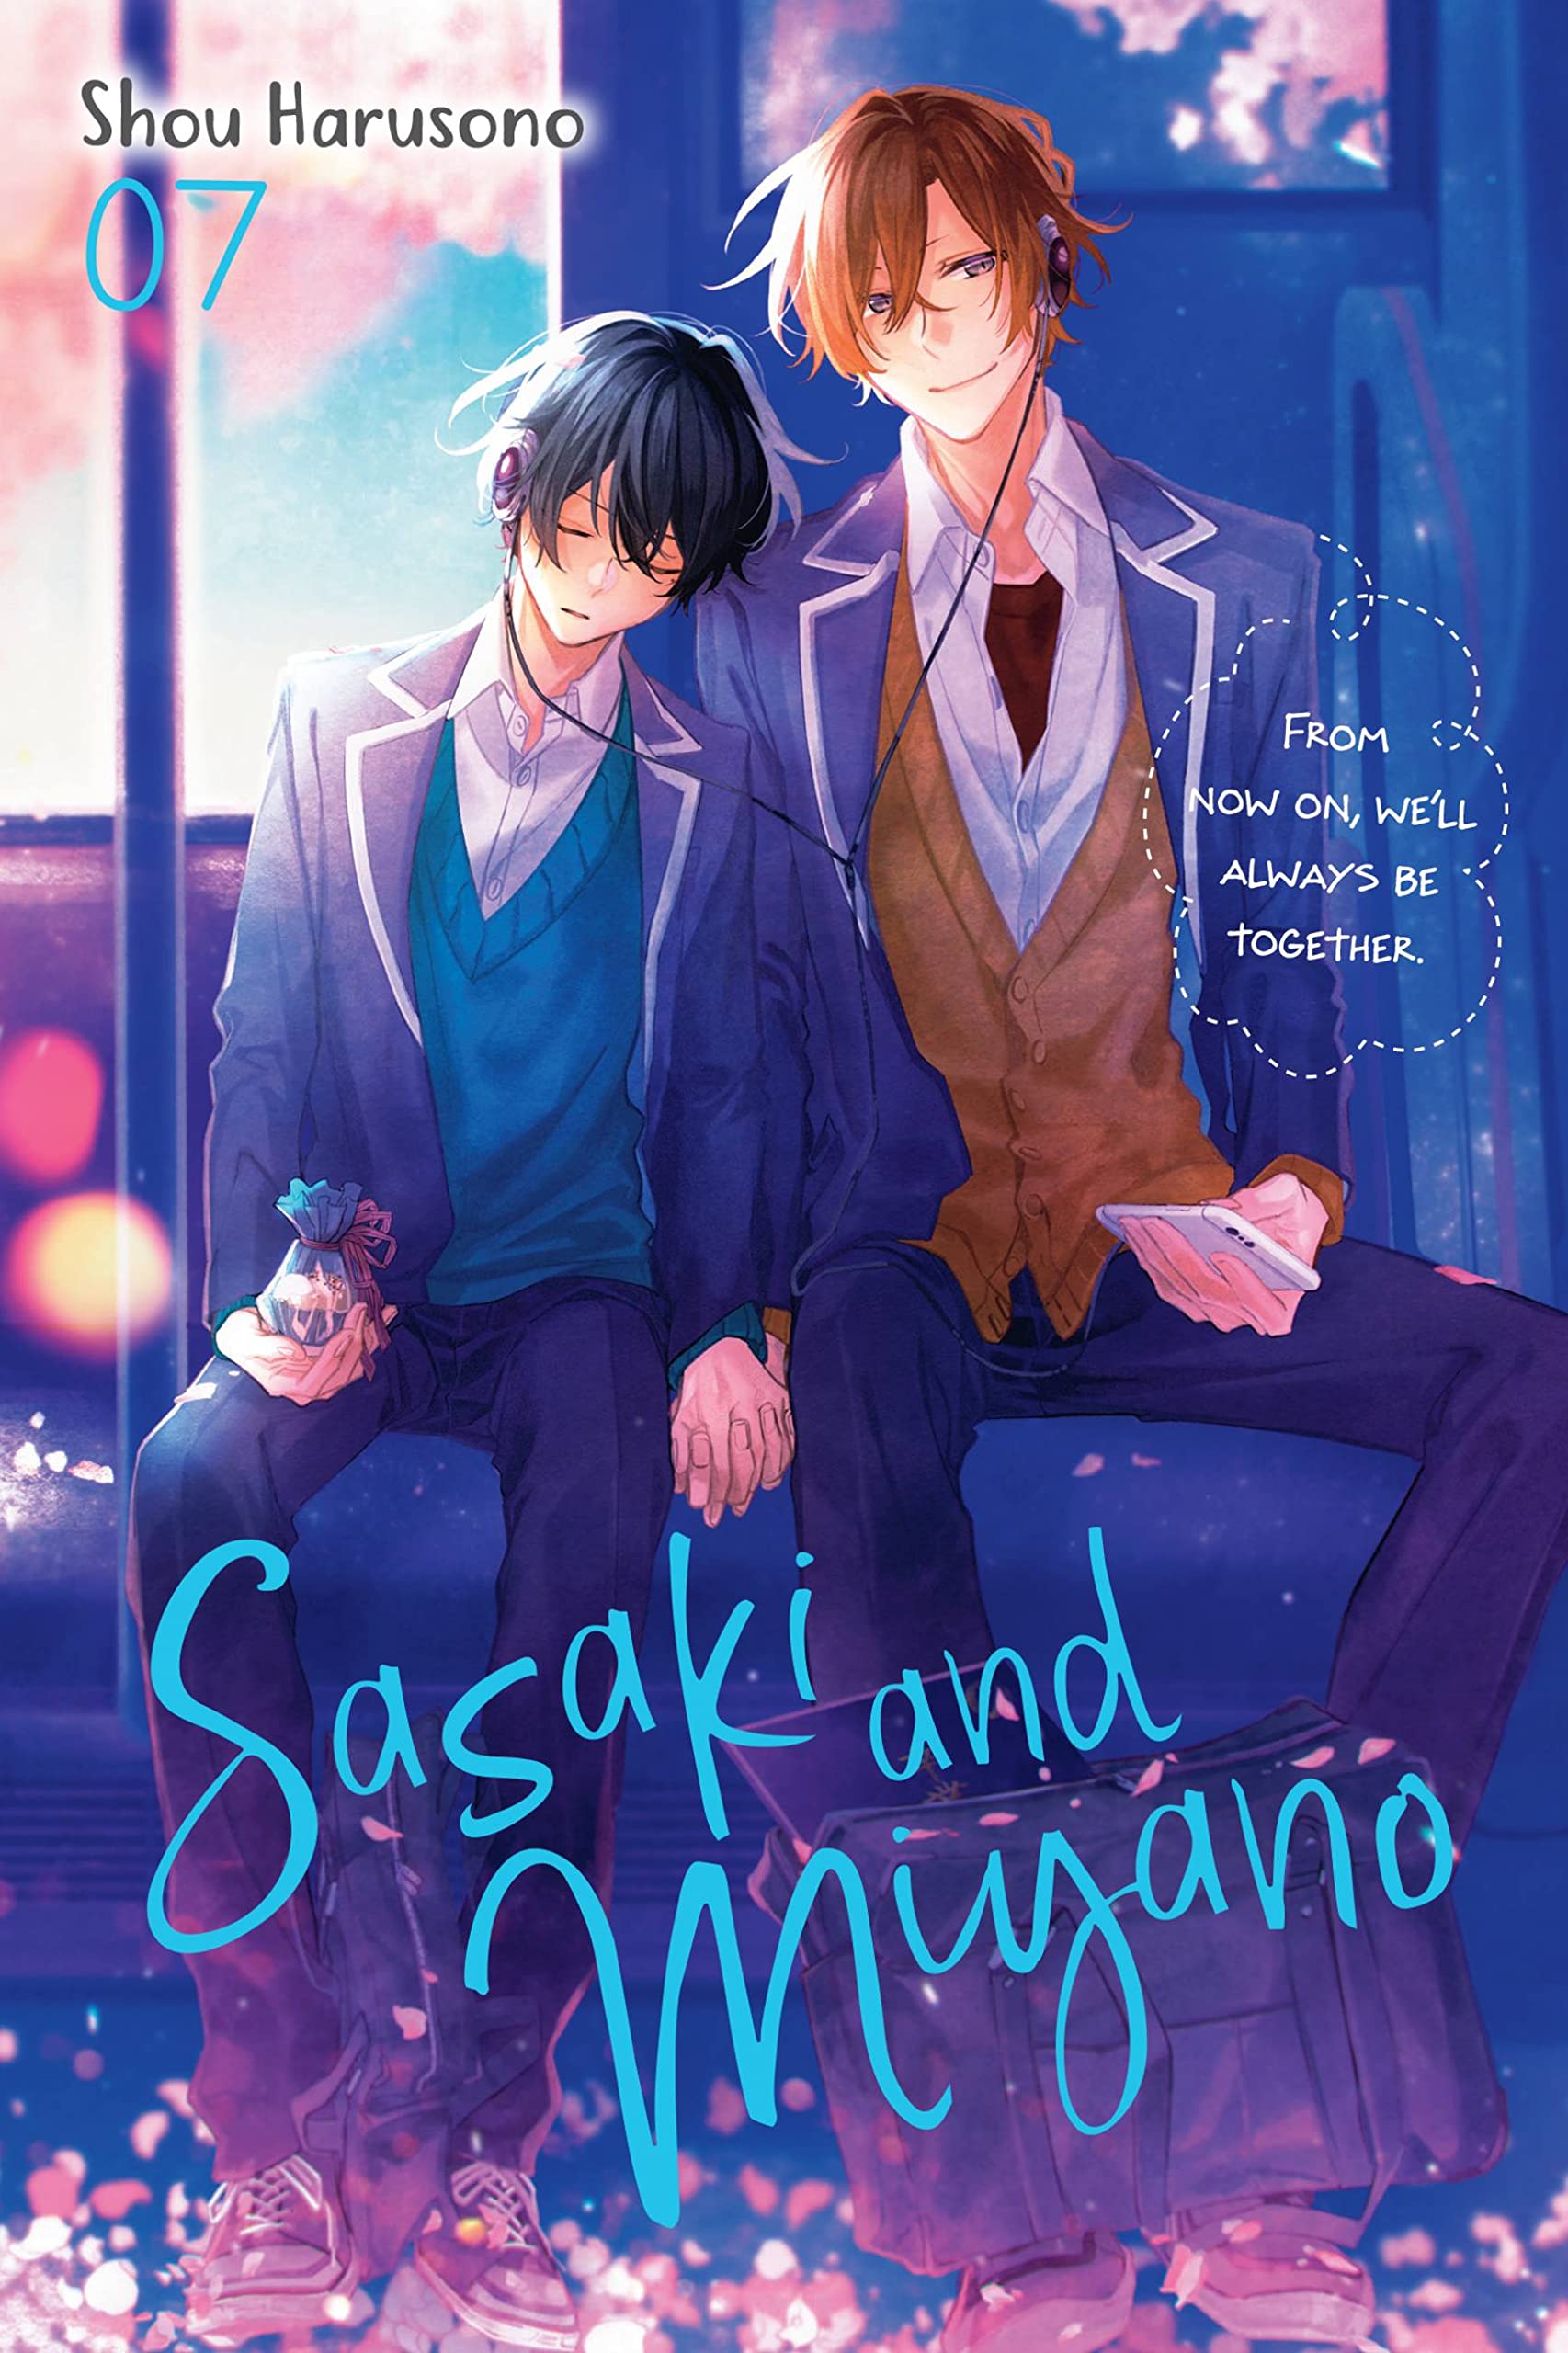 What Is the Sasaki and Miyano Movie Release Date?